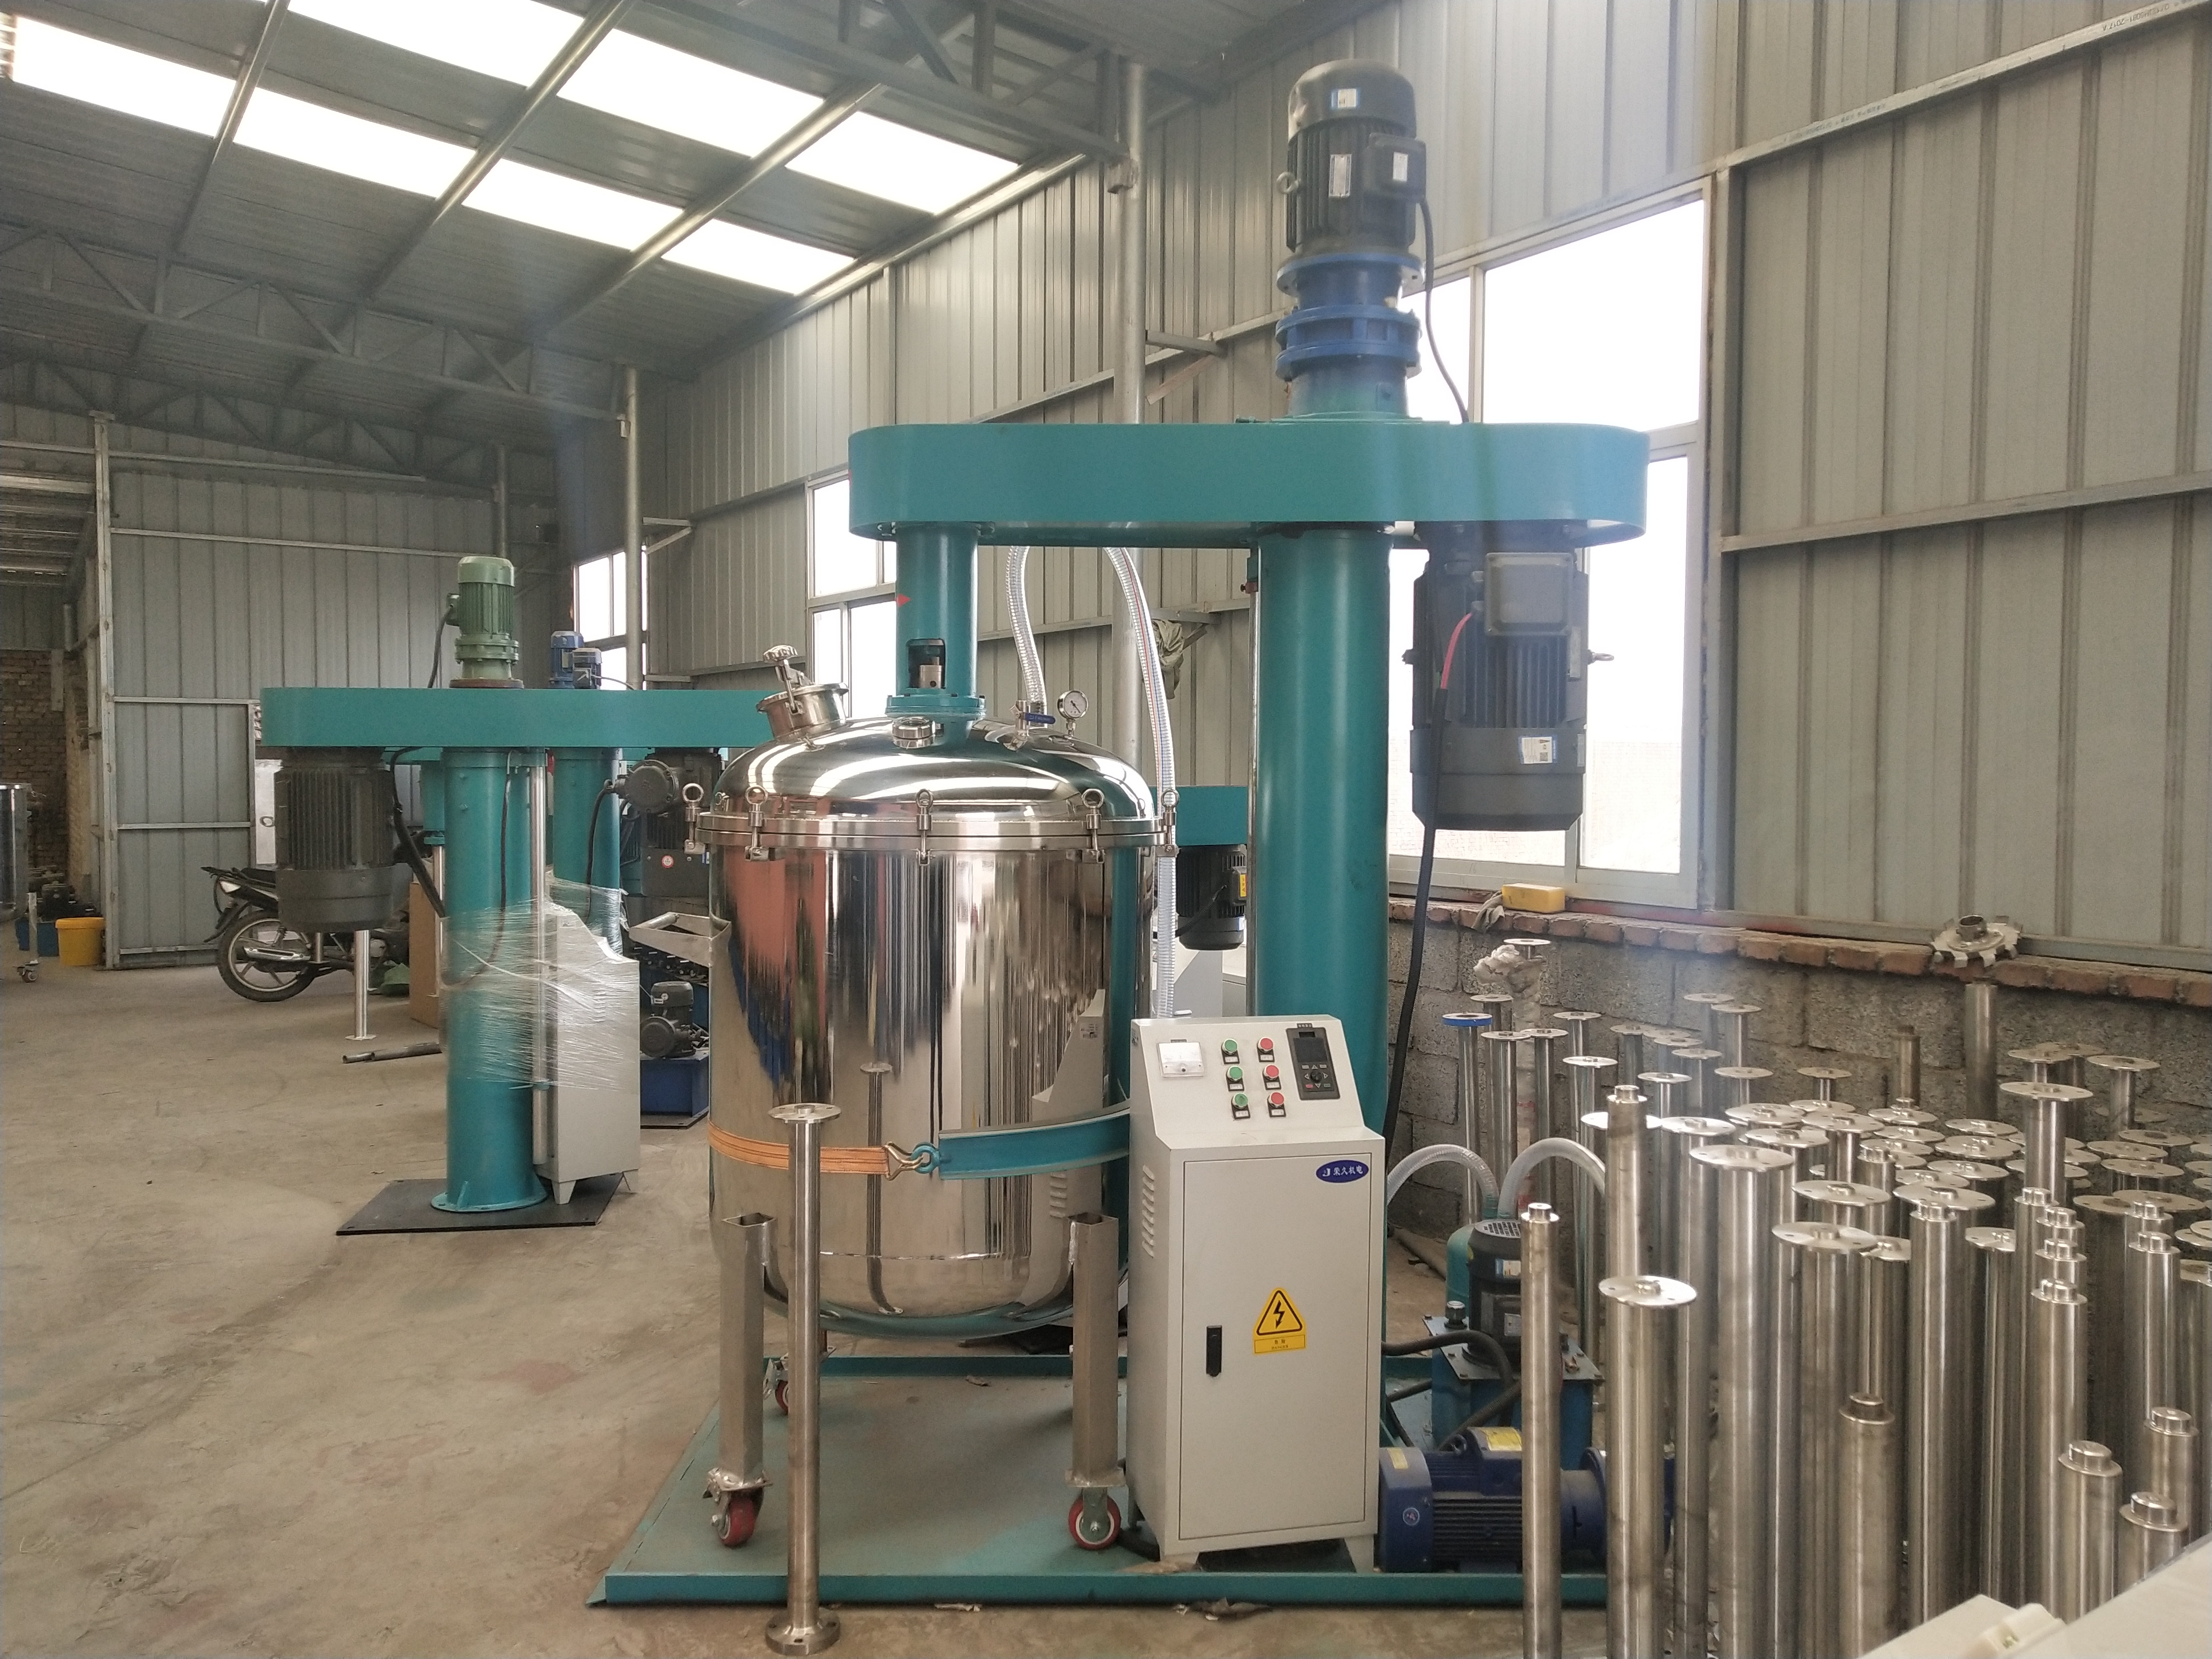 KARVIL Poly ester putty multi-function strong disperser